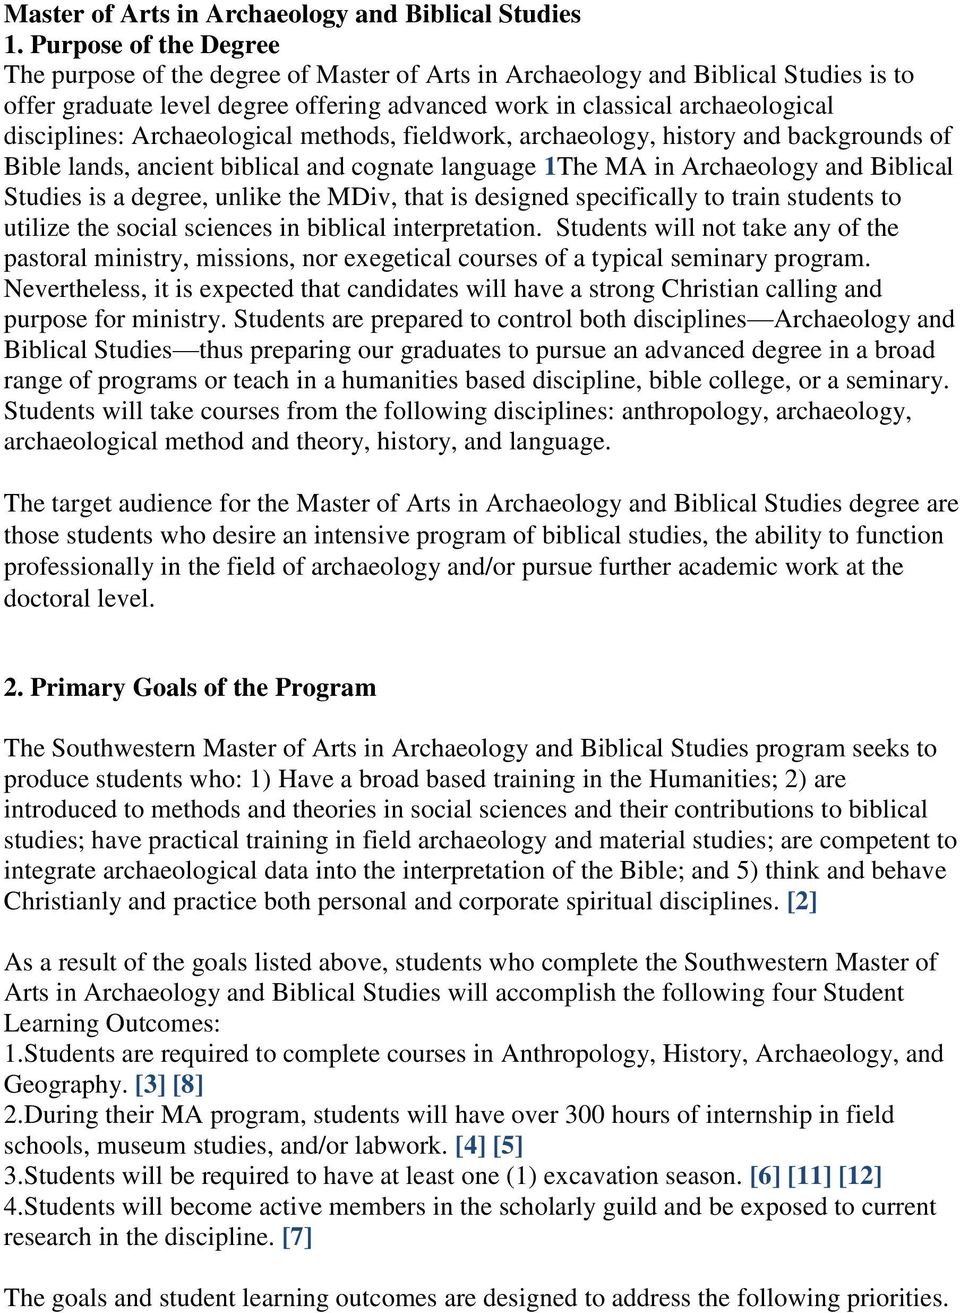 Archaeological methods, fieldwork, archaeology, history and backgrounds of Bible lands, ancient biblical and cognate language 1The MA in Archaeology and Biblical Studies is a degree, unlike the MDiv,